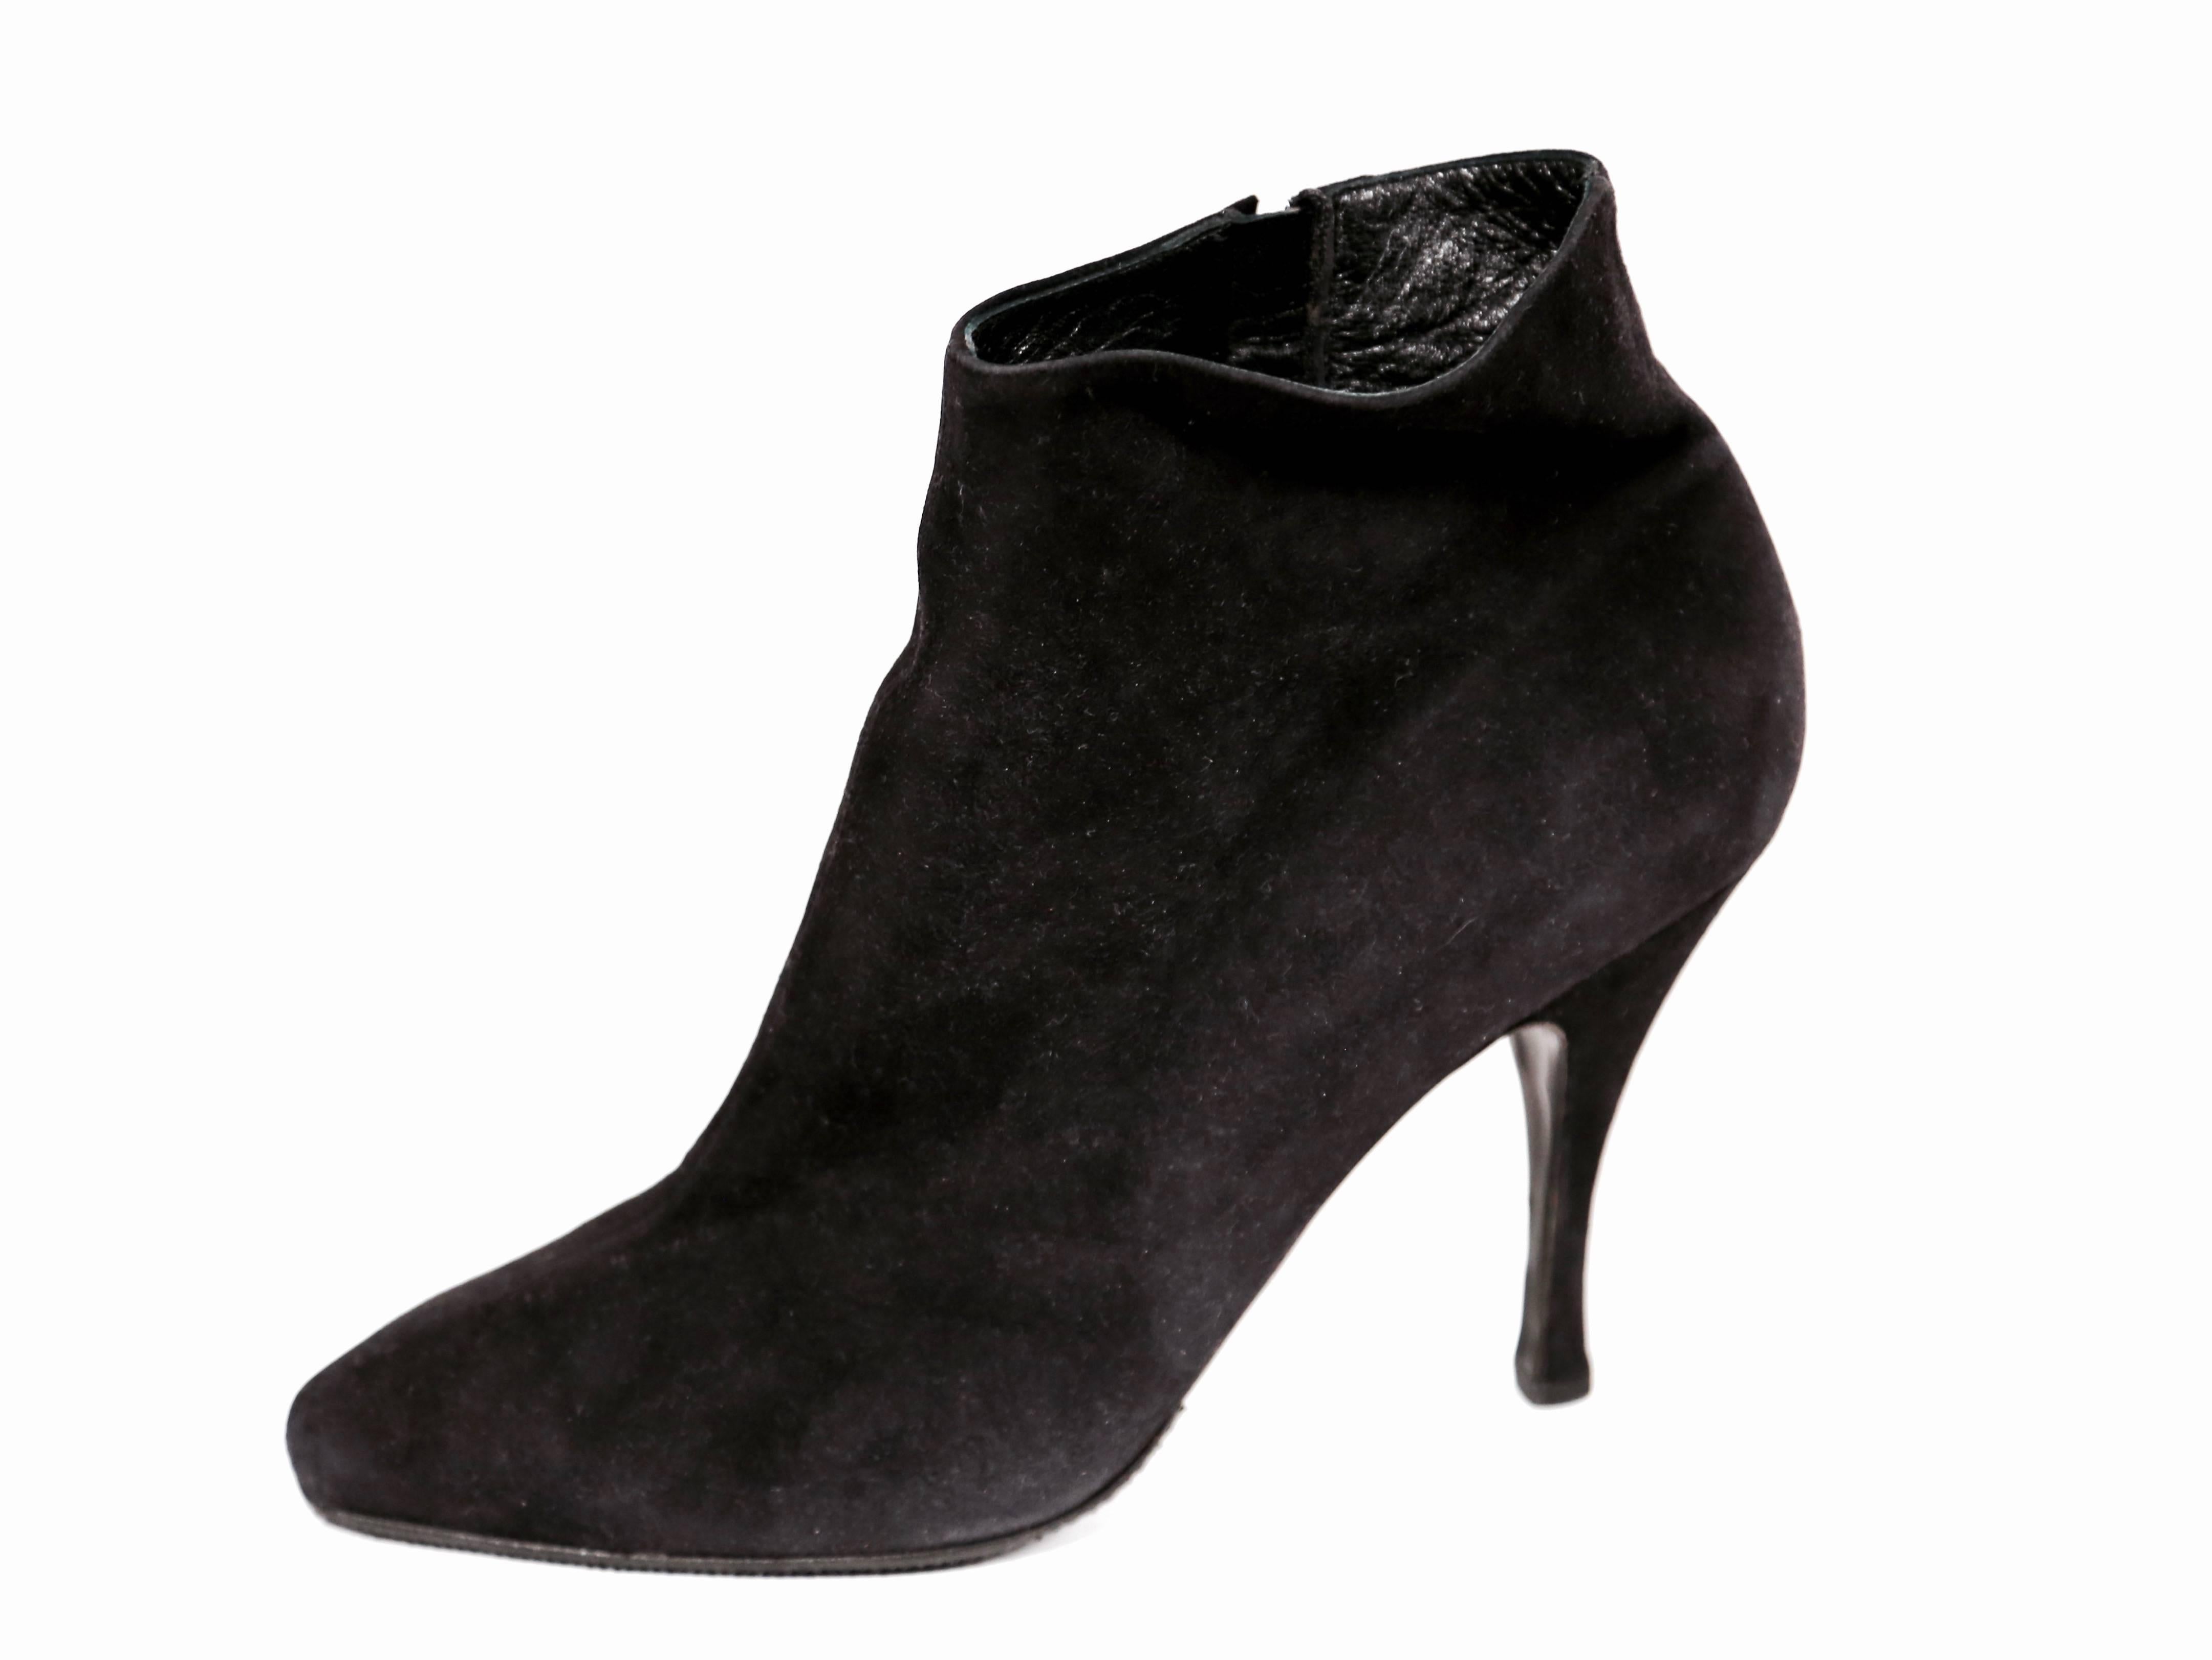 Black suede stiletto ankle boots with almond shaped toe from Alaia dating to the early 1990's. French Size 40 (US 9-9.5). Made in France. Composed entirely of leather.  Interior zip closure. Good condition.